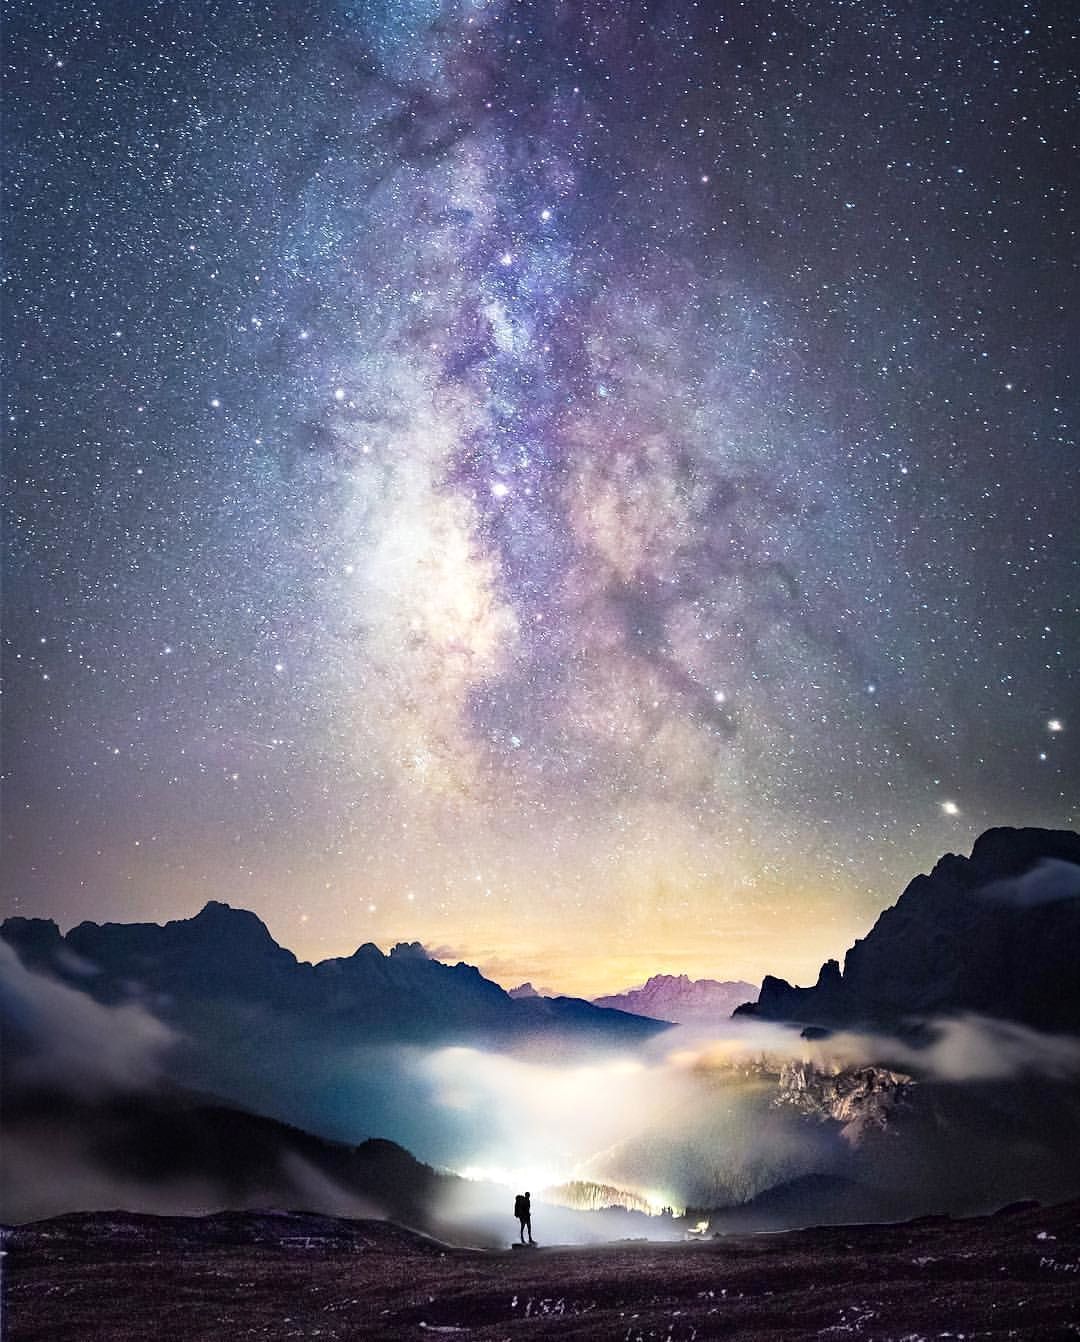 The almighty Dolomites at night Photo Explore. Share. Inspire: #earthroulette. Landscape picture, Instagram, Photography